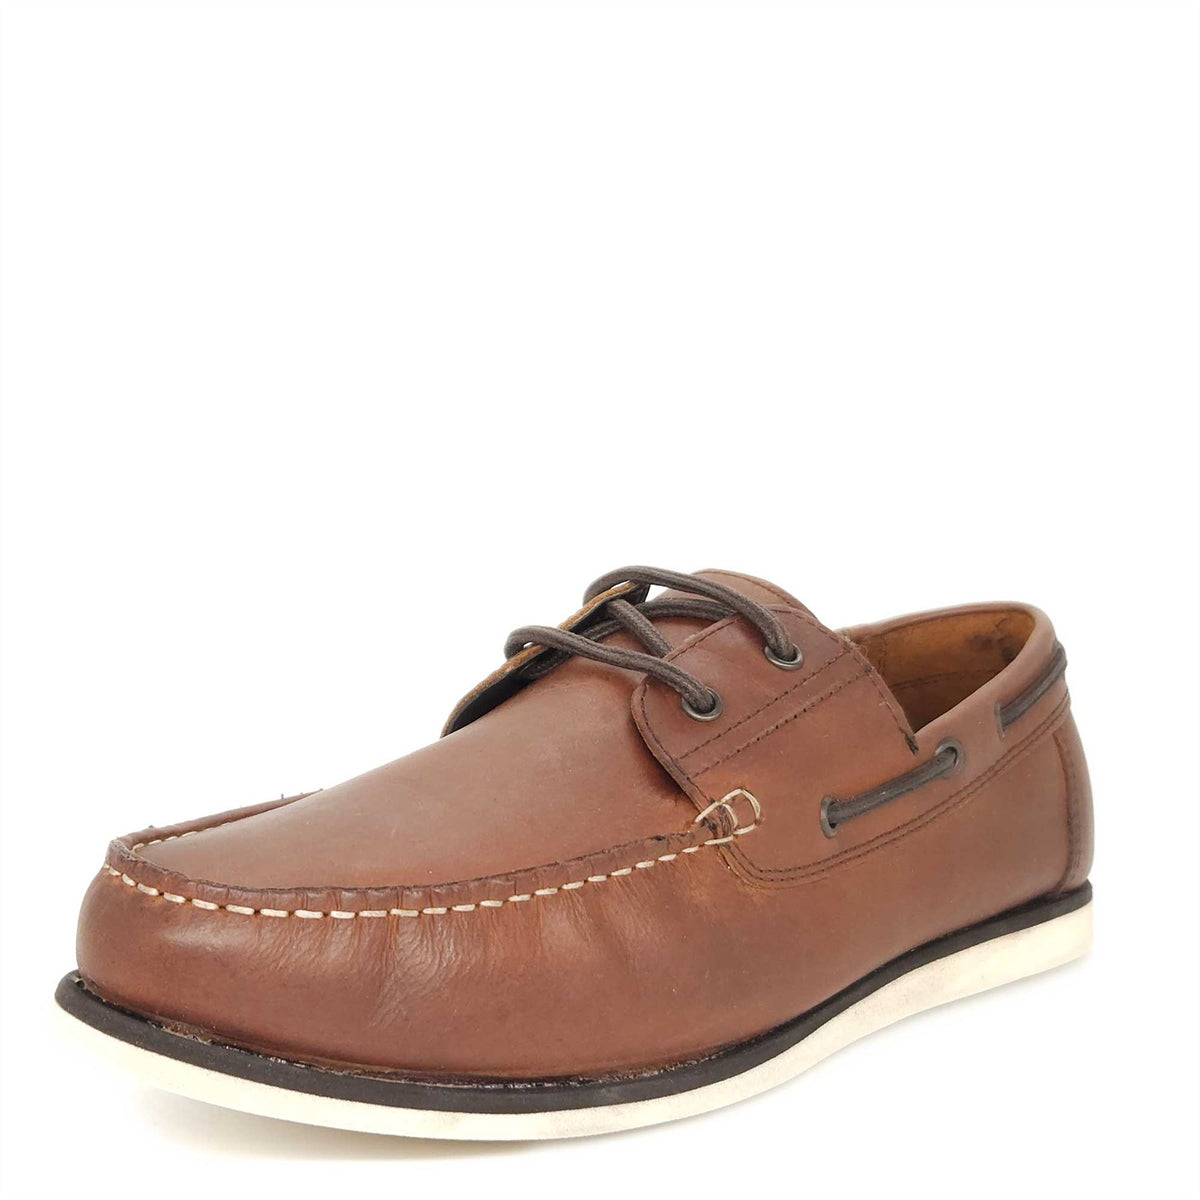 Red Tape Crick Helford Leather Mens Casual Boat Shoes